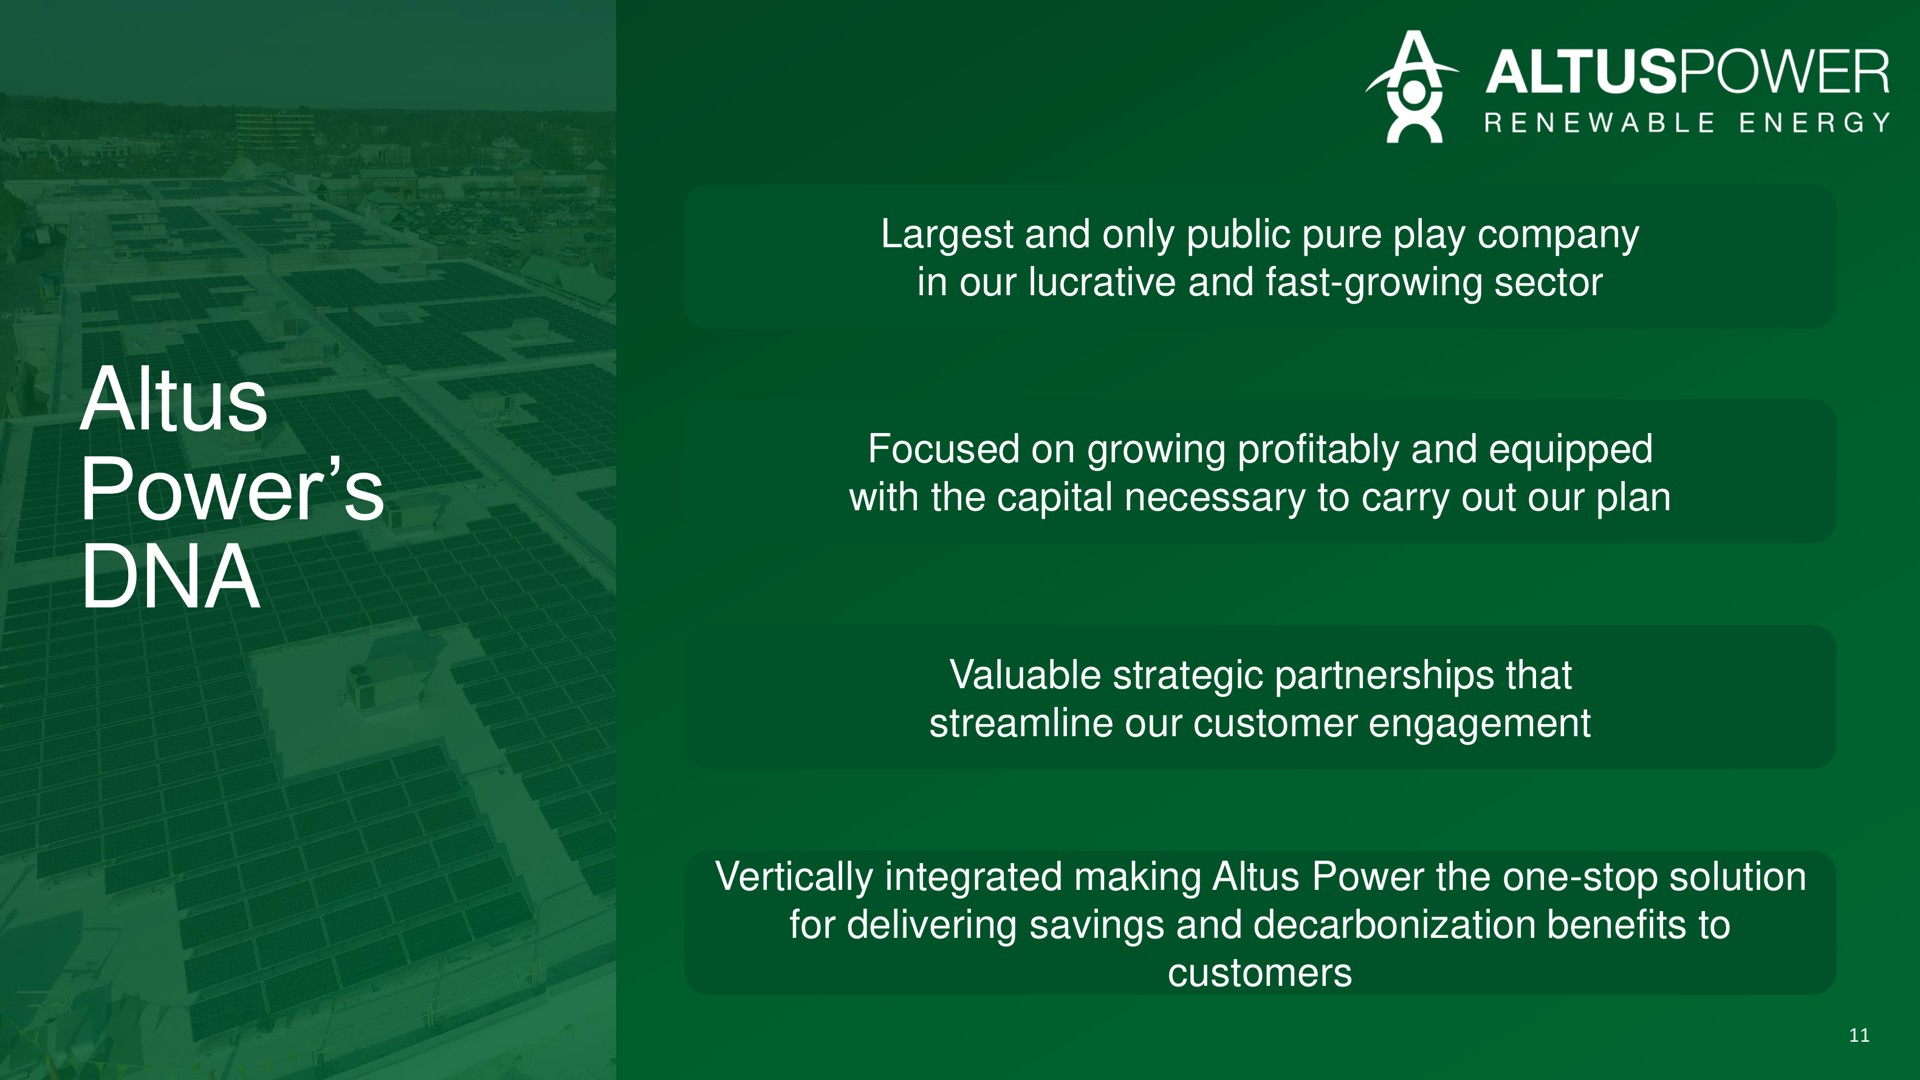 power and only public pure play company in our lucrative and fast growing sector focused on growing profitably and equipped with the capital necessary to carry out our plan valuable strategic partnerships that streamline our customer engagement vertically integrated making power the one stop solution for delivering savings and decarbonization benefits to customers | Altus Power